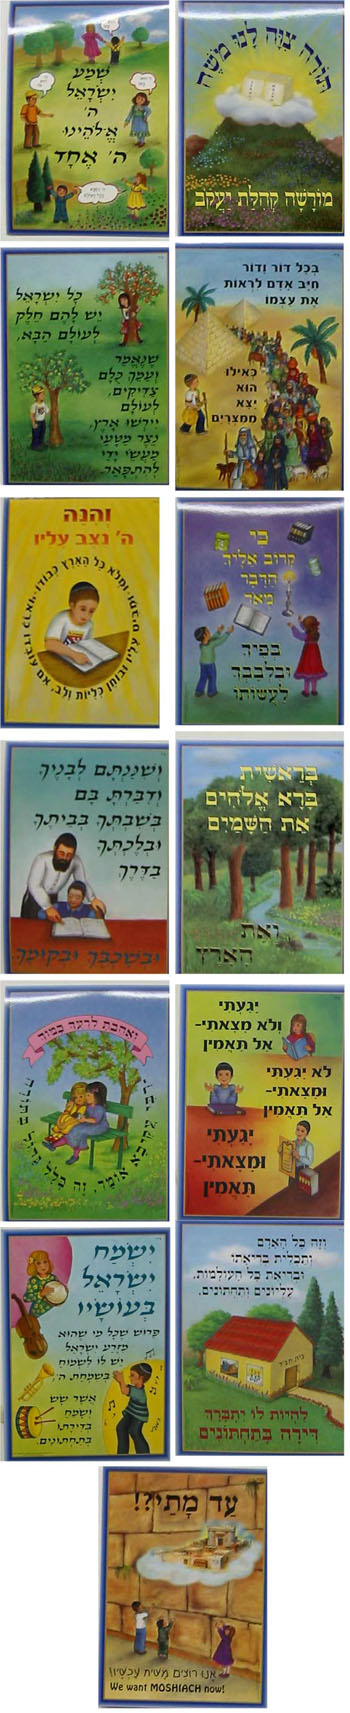 jewish-educational-materials-head-of-the-class